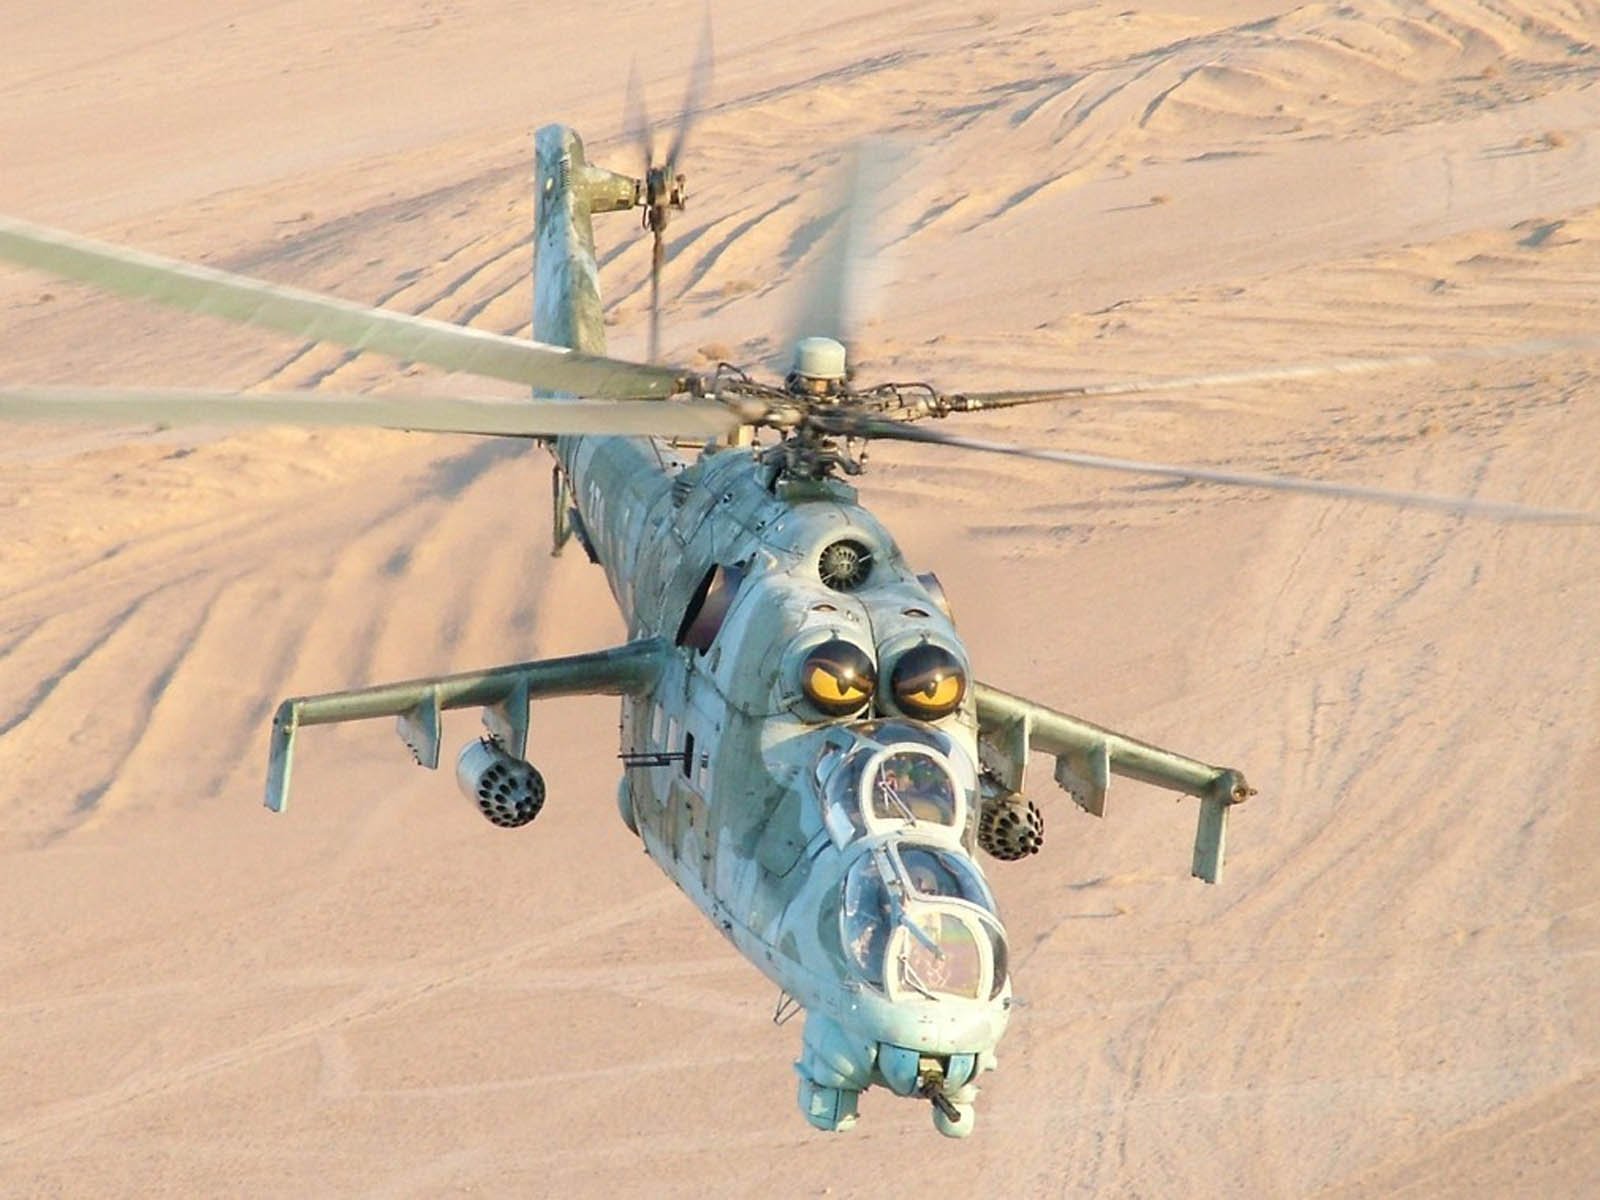 mi 24, Hind, Gunship, Russian, Russia, Military, Weapon, Helicopter